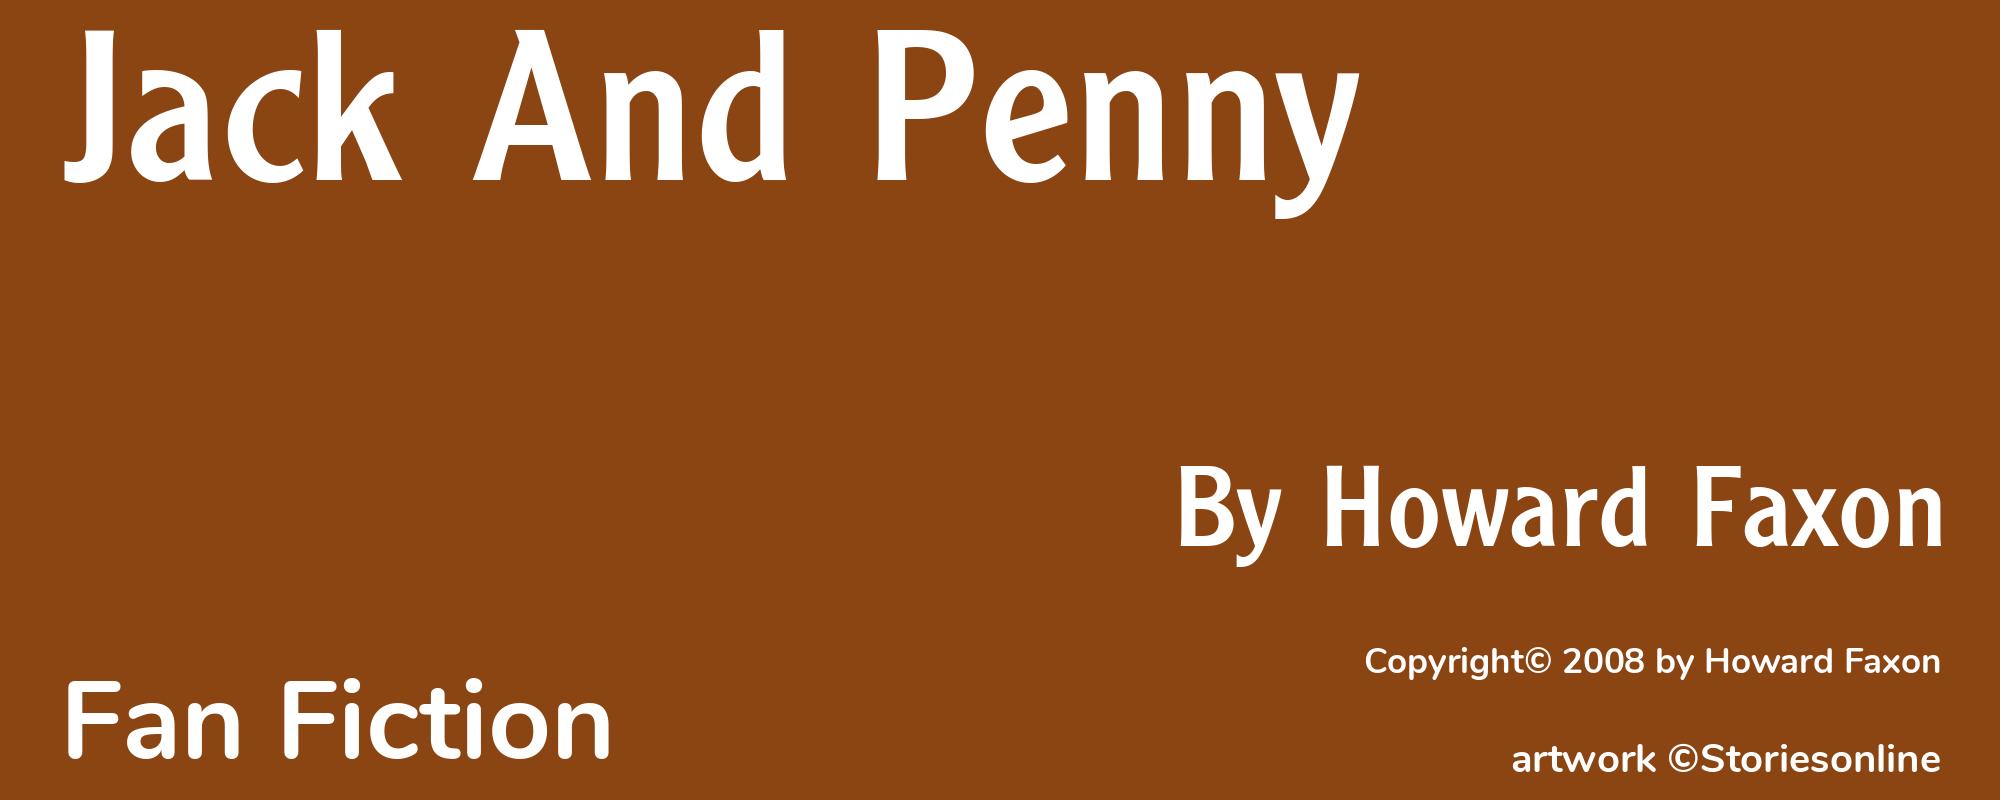 Jack And Penny - Cover